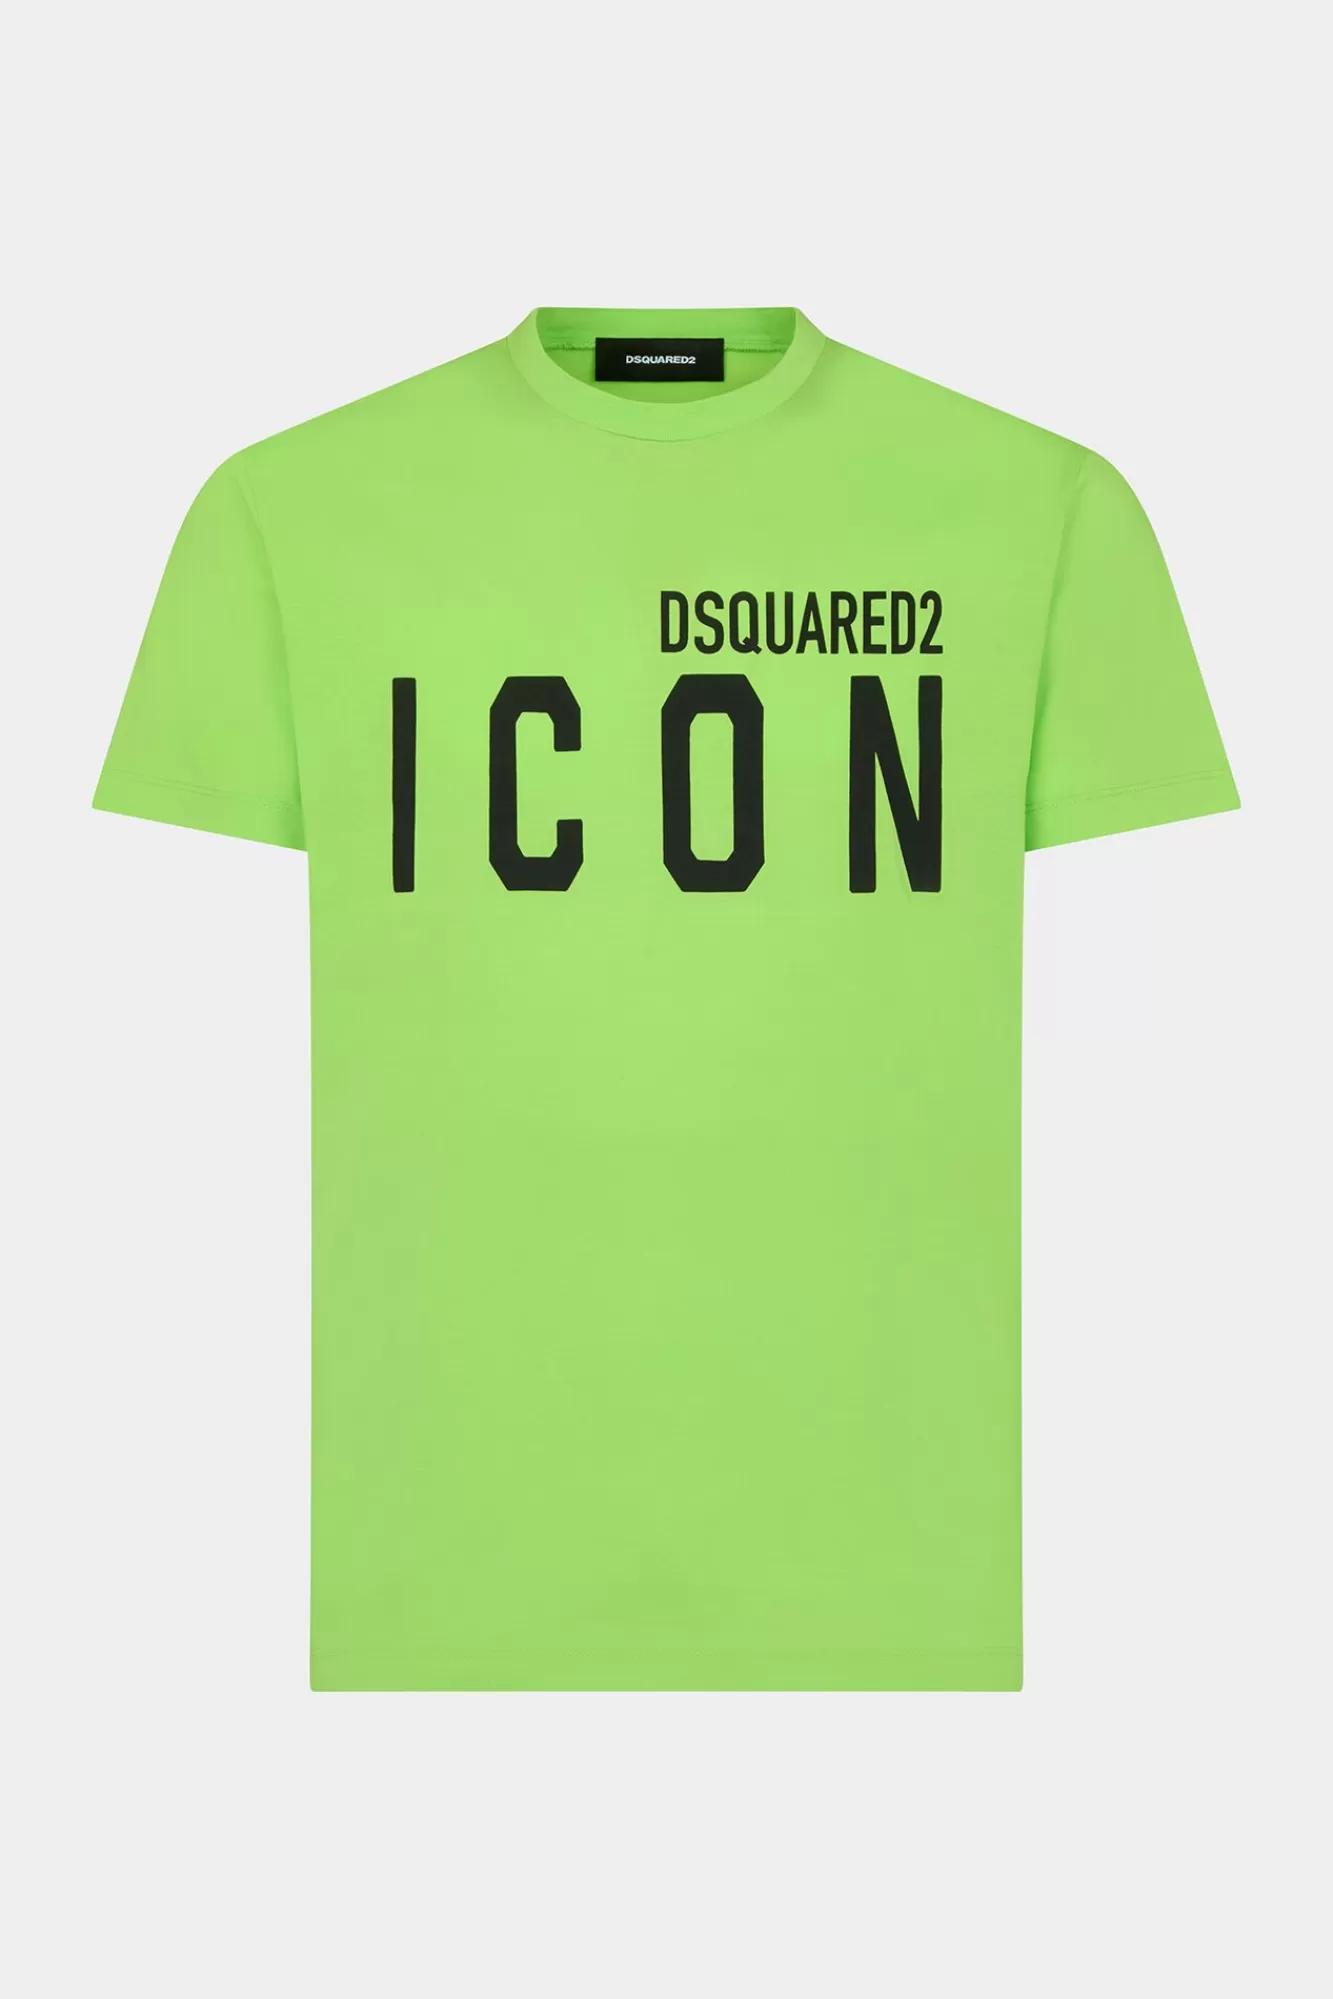 Be Icon Cool T-Shirt<Dsquared2 Outlet